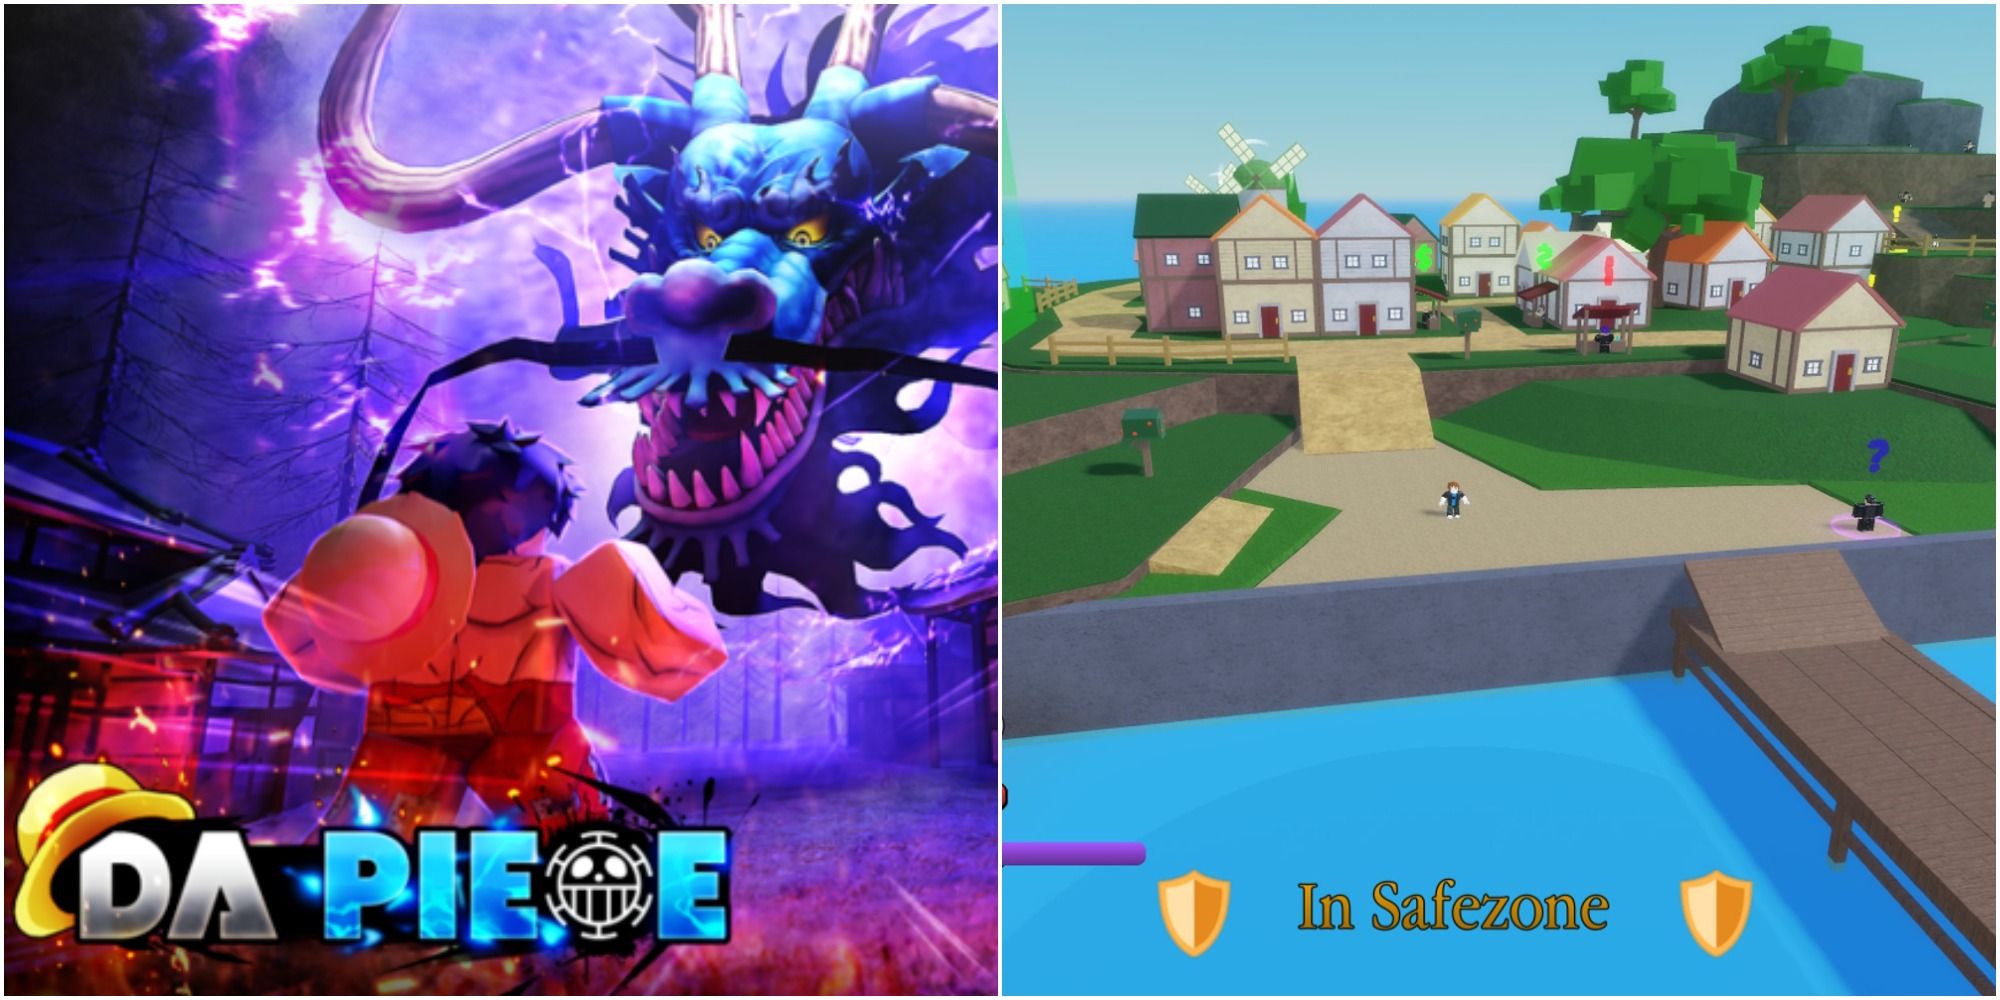 ALL NEW WORKING CODES FOR A ONE PIECE GAME 2022! ROBLOX A ONE PIECE GAME  CODES 